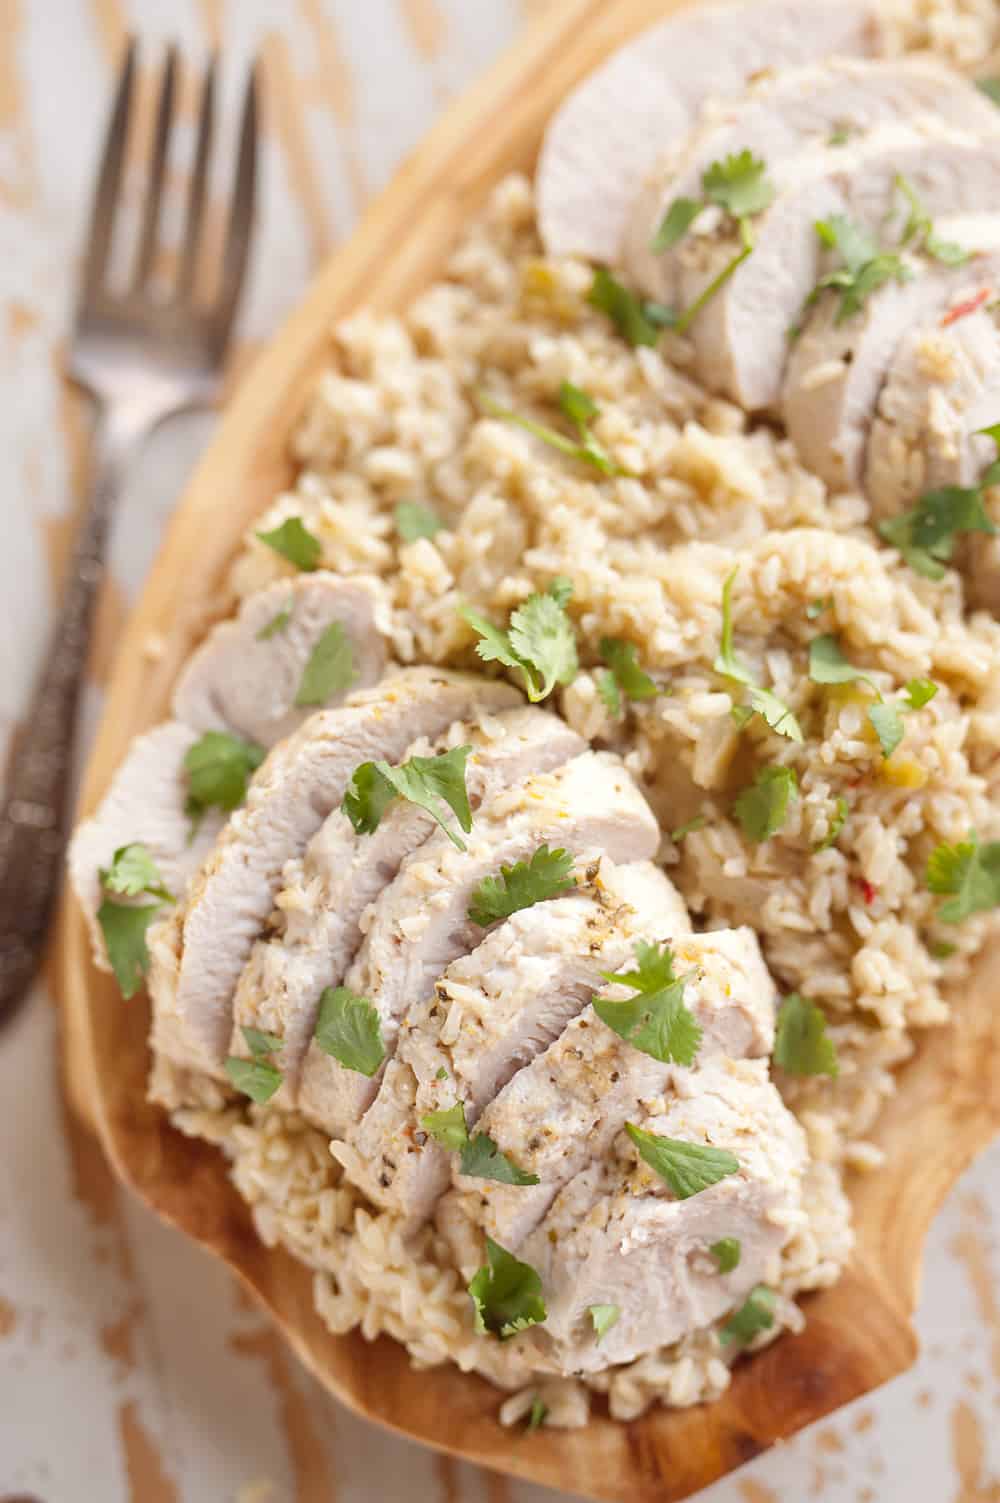 Pressure Cooker Turkey Verde & Rice is an easy 30 minute recipe made in your Instant Pot with only five ingredients! This healthy dinner idea is loaded with turkey tenderloins, salsa verde and brown rice for a quick and delicious meal you will love. 